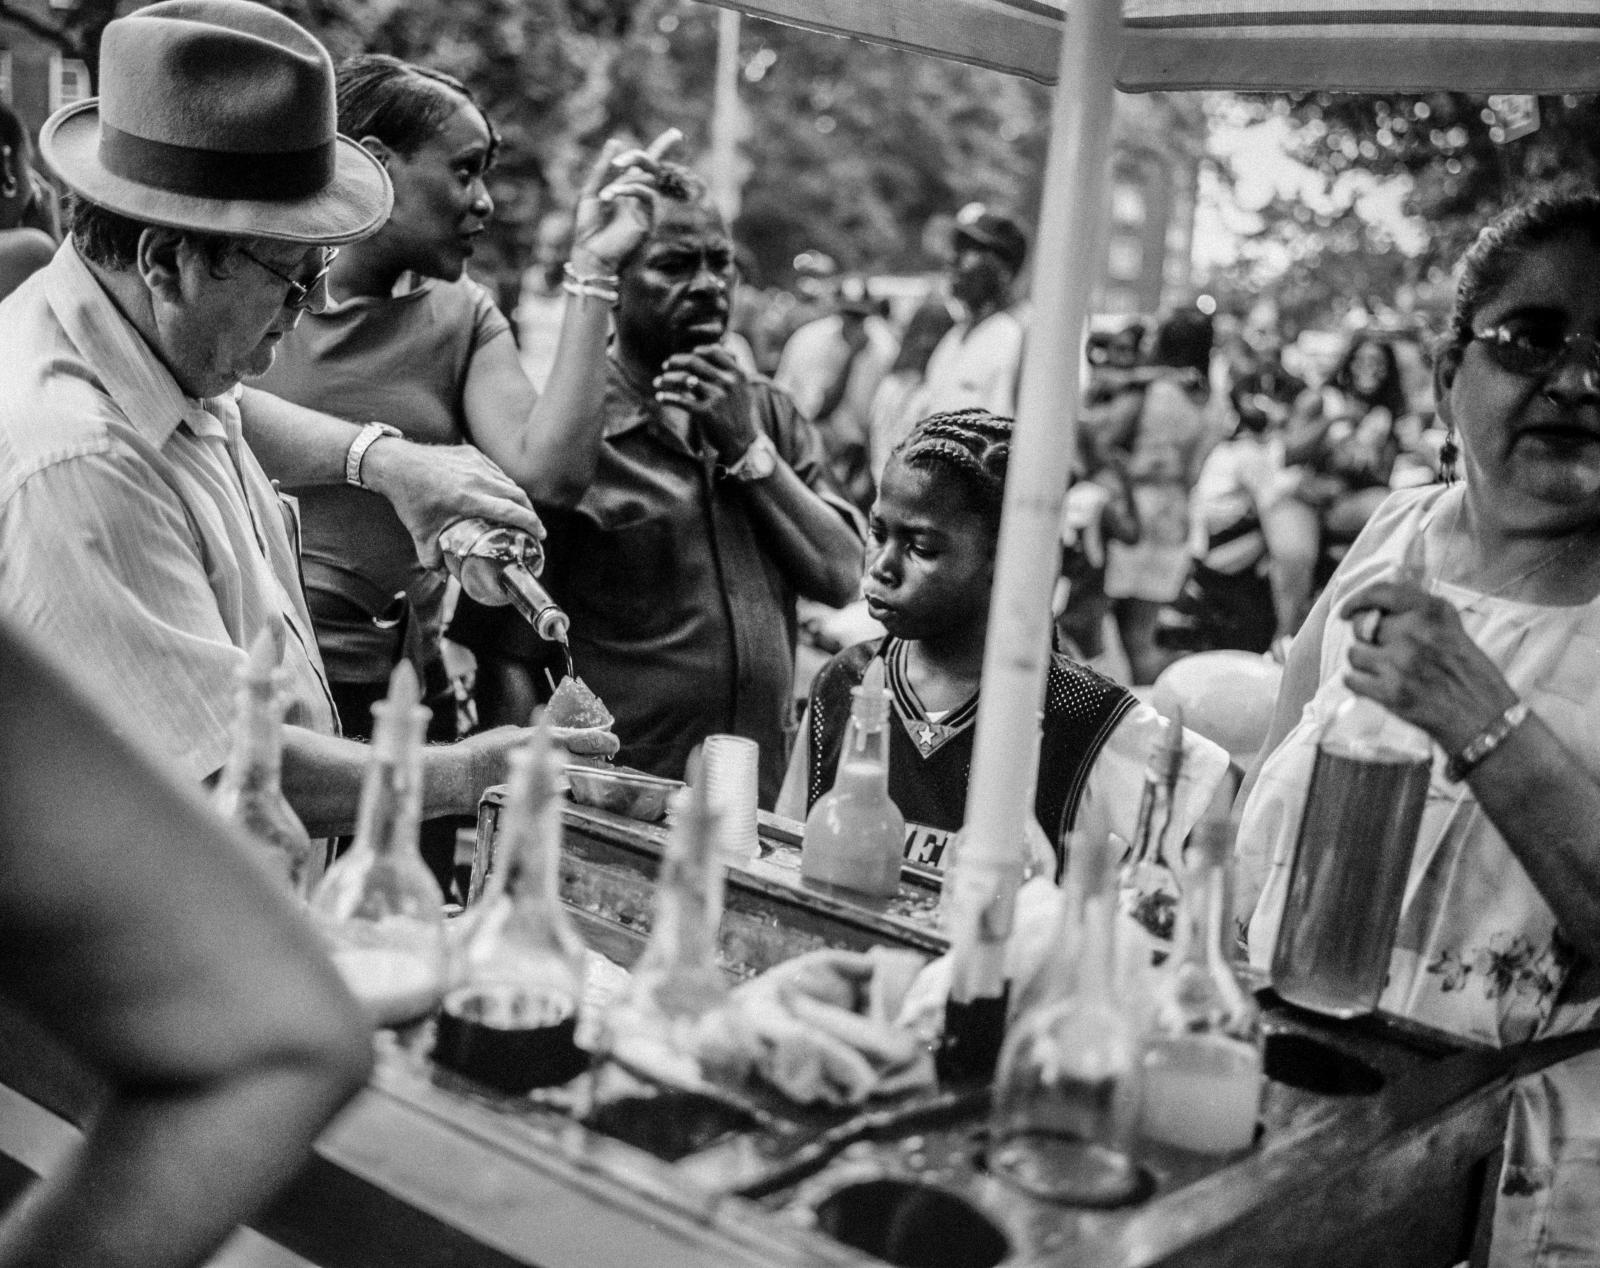 Image from Street Photography/BW Works -  Shaved Ice Vendor  Old Timer's Day, August 3, 2003...